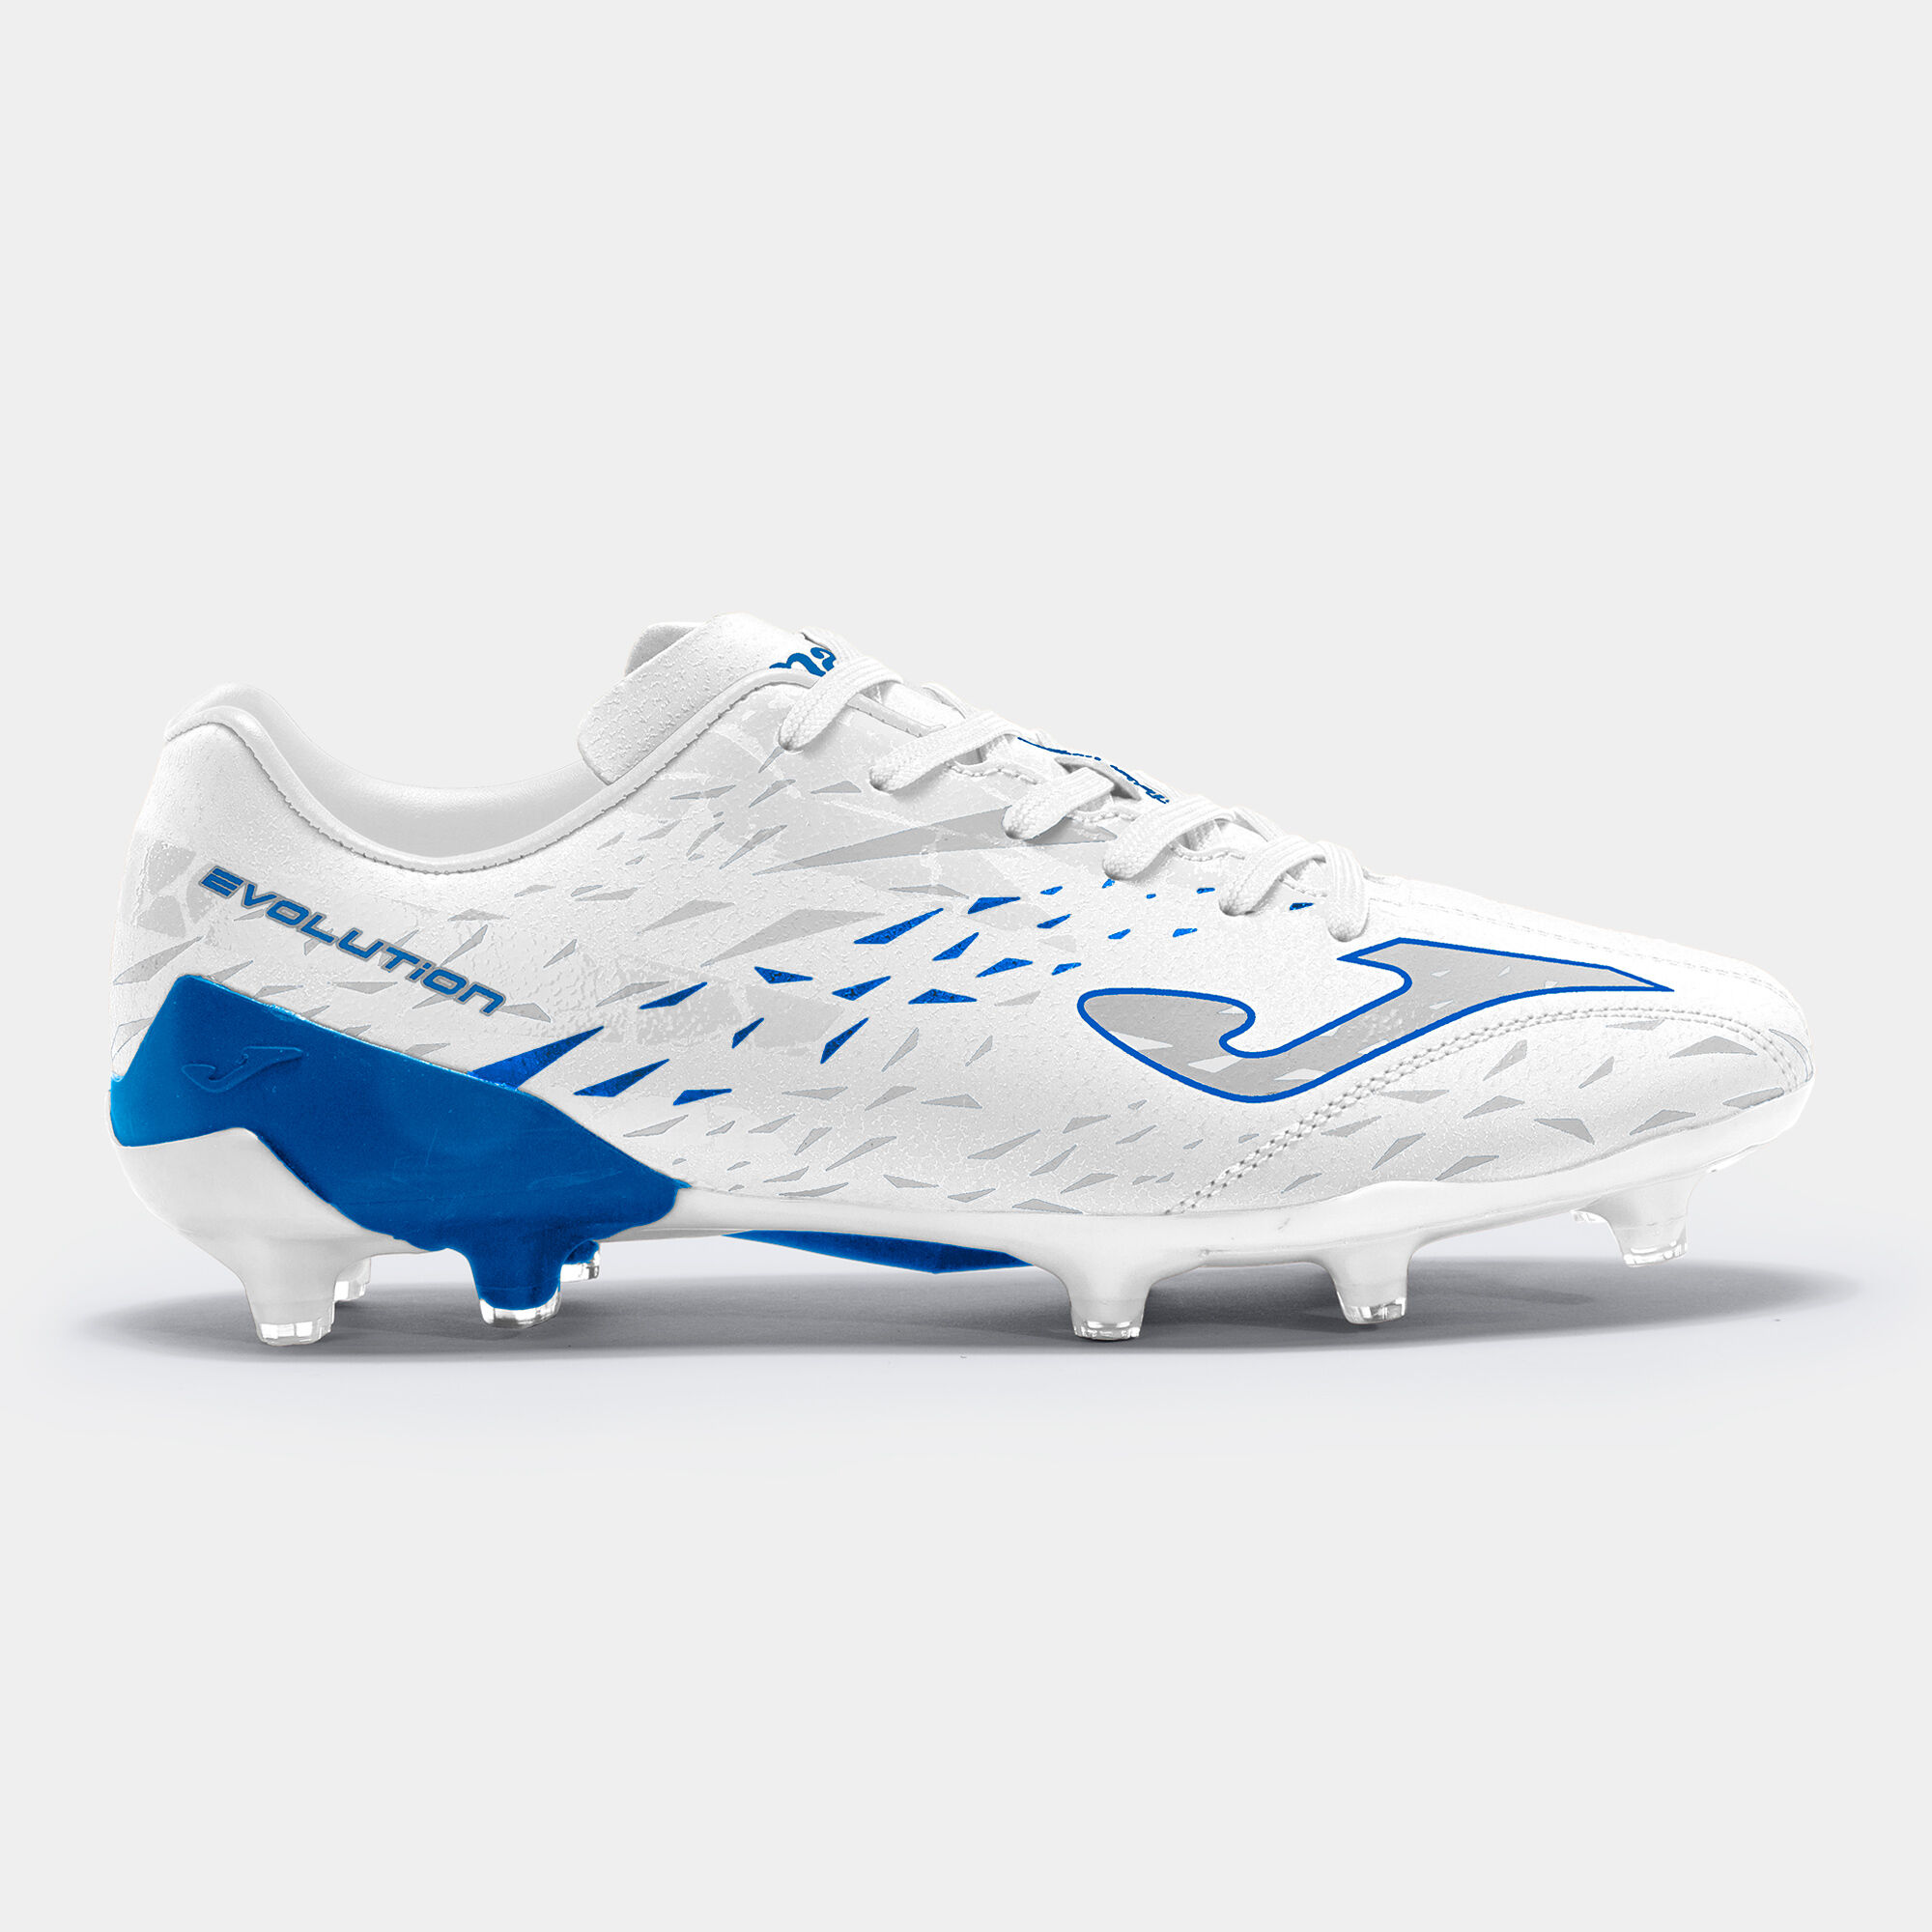 Football boots Evolution Cup 23 firm ground FG white royal blue